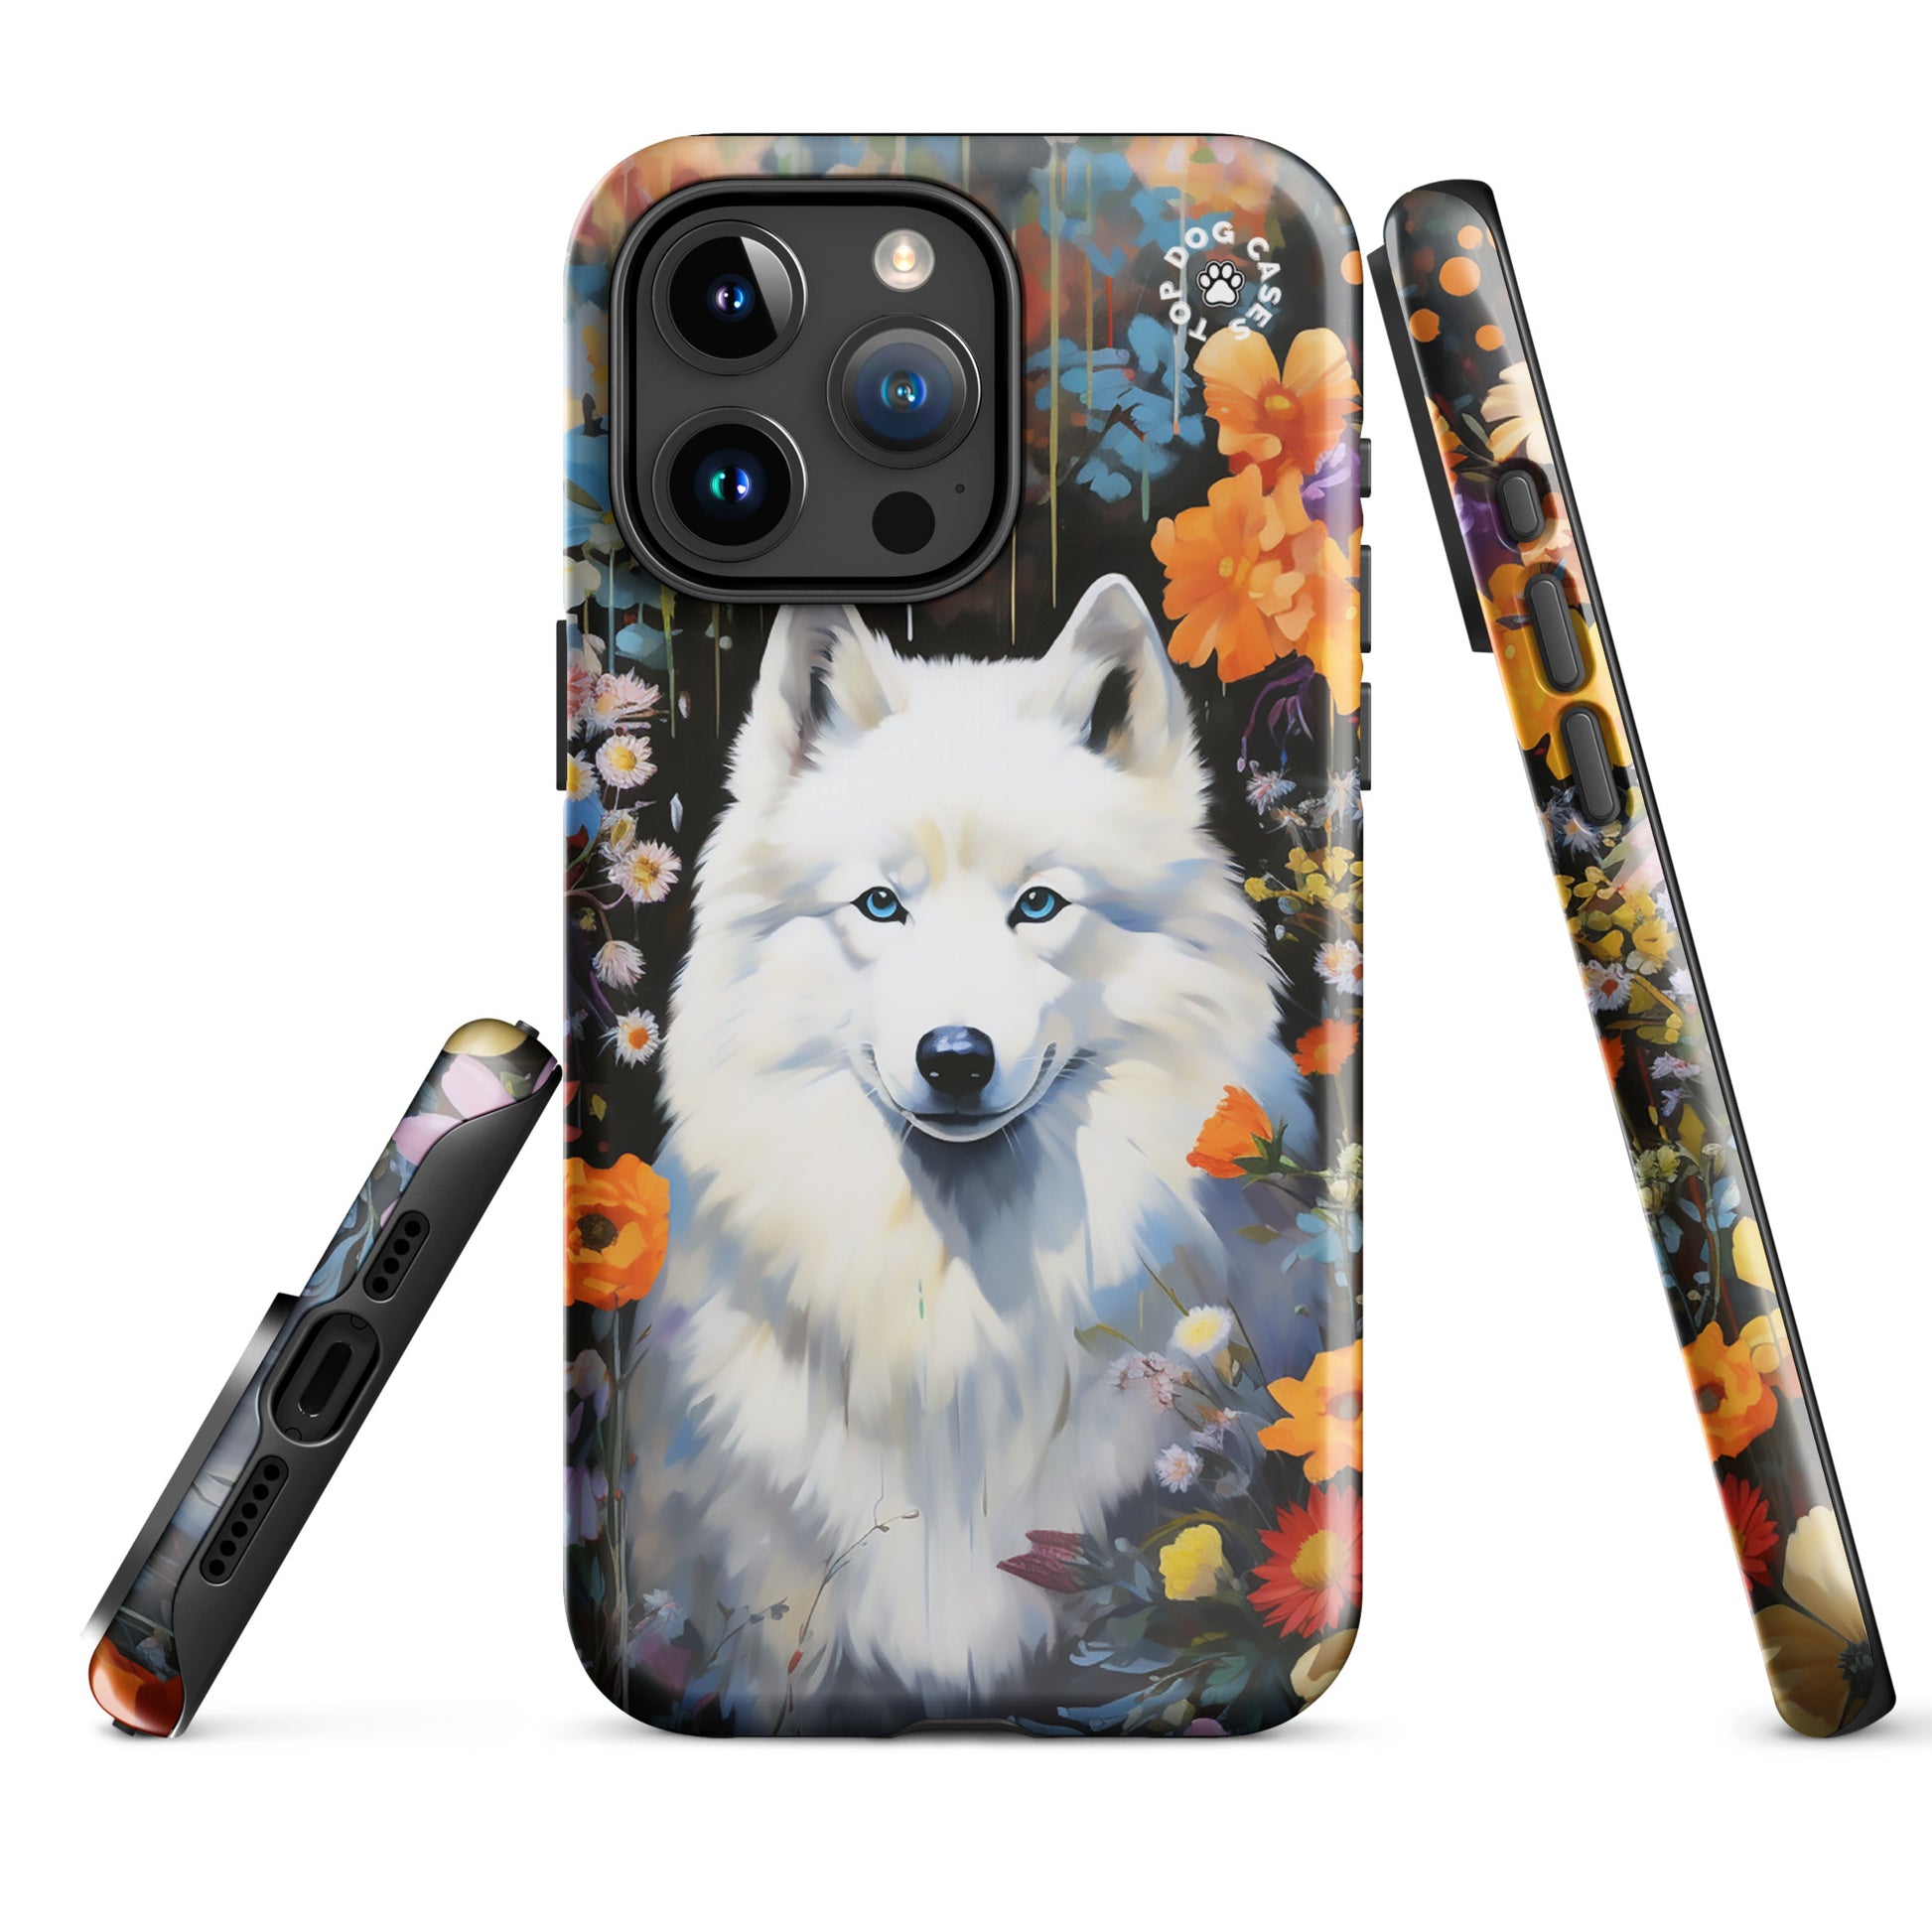 White Siberian Husky Around Flowers Tough Case for iPhone - Top Dog Cases - #CuteDog, #CuteDogs, #Flowers, #Husky, #iPhone, #iPhone11, #iphone11case, #iPhone12, #iPhone12case, #iPhone13, #iPhone13case, #iPhone13DogCase, #iPhone13Mini, #iPhone13Pro, #iPhone13ProMax, #iPhone14, #iPhone14case, #iPhone14DogCase, #iPhone14Plus, #iPhone14Pluscase, #iPhone14Pro, #iPhone14ProMax, #iPhone14ProMaxCase, #iPhone15, #iPhone15case, #iPhonecase, #iphonedogcase, #Siberian Husky, #White Siberian Husky, DogsandFlowers